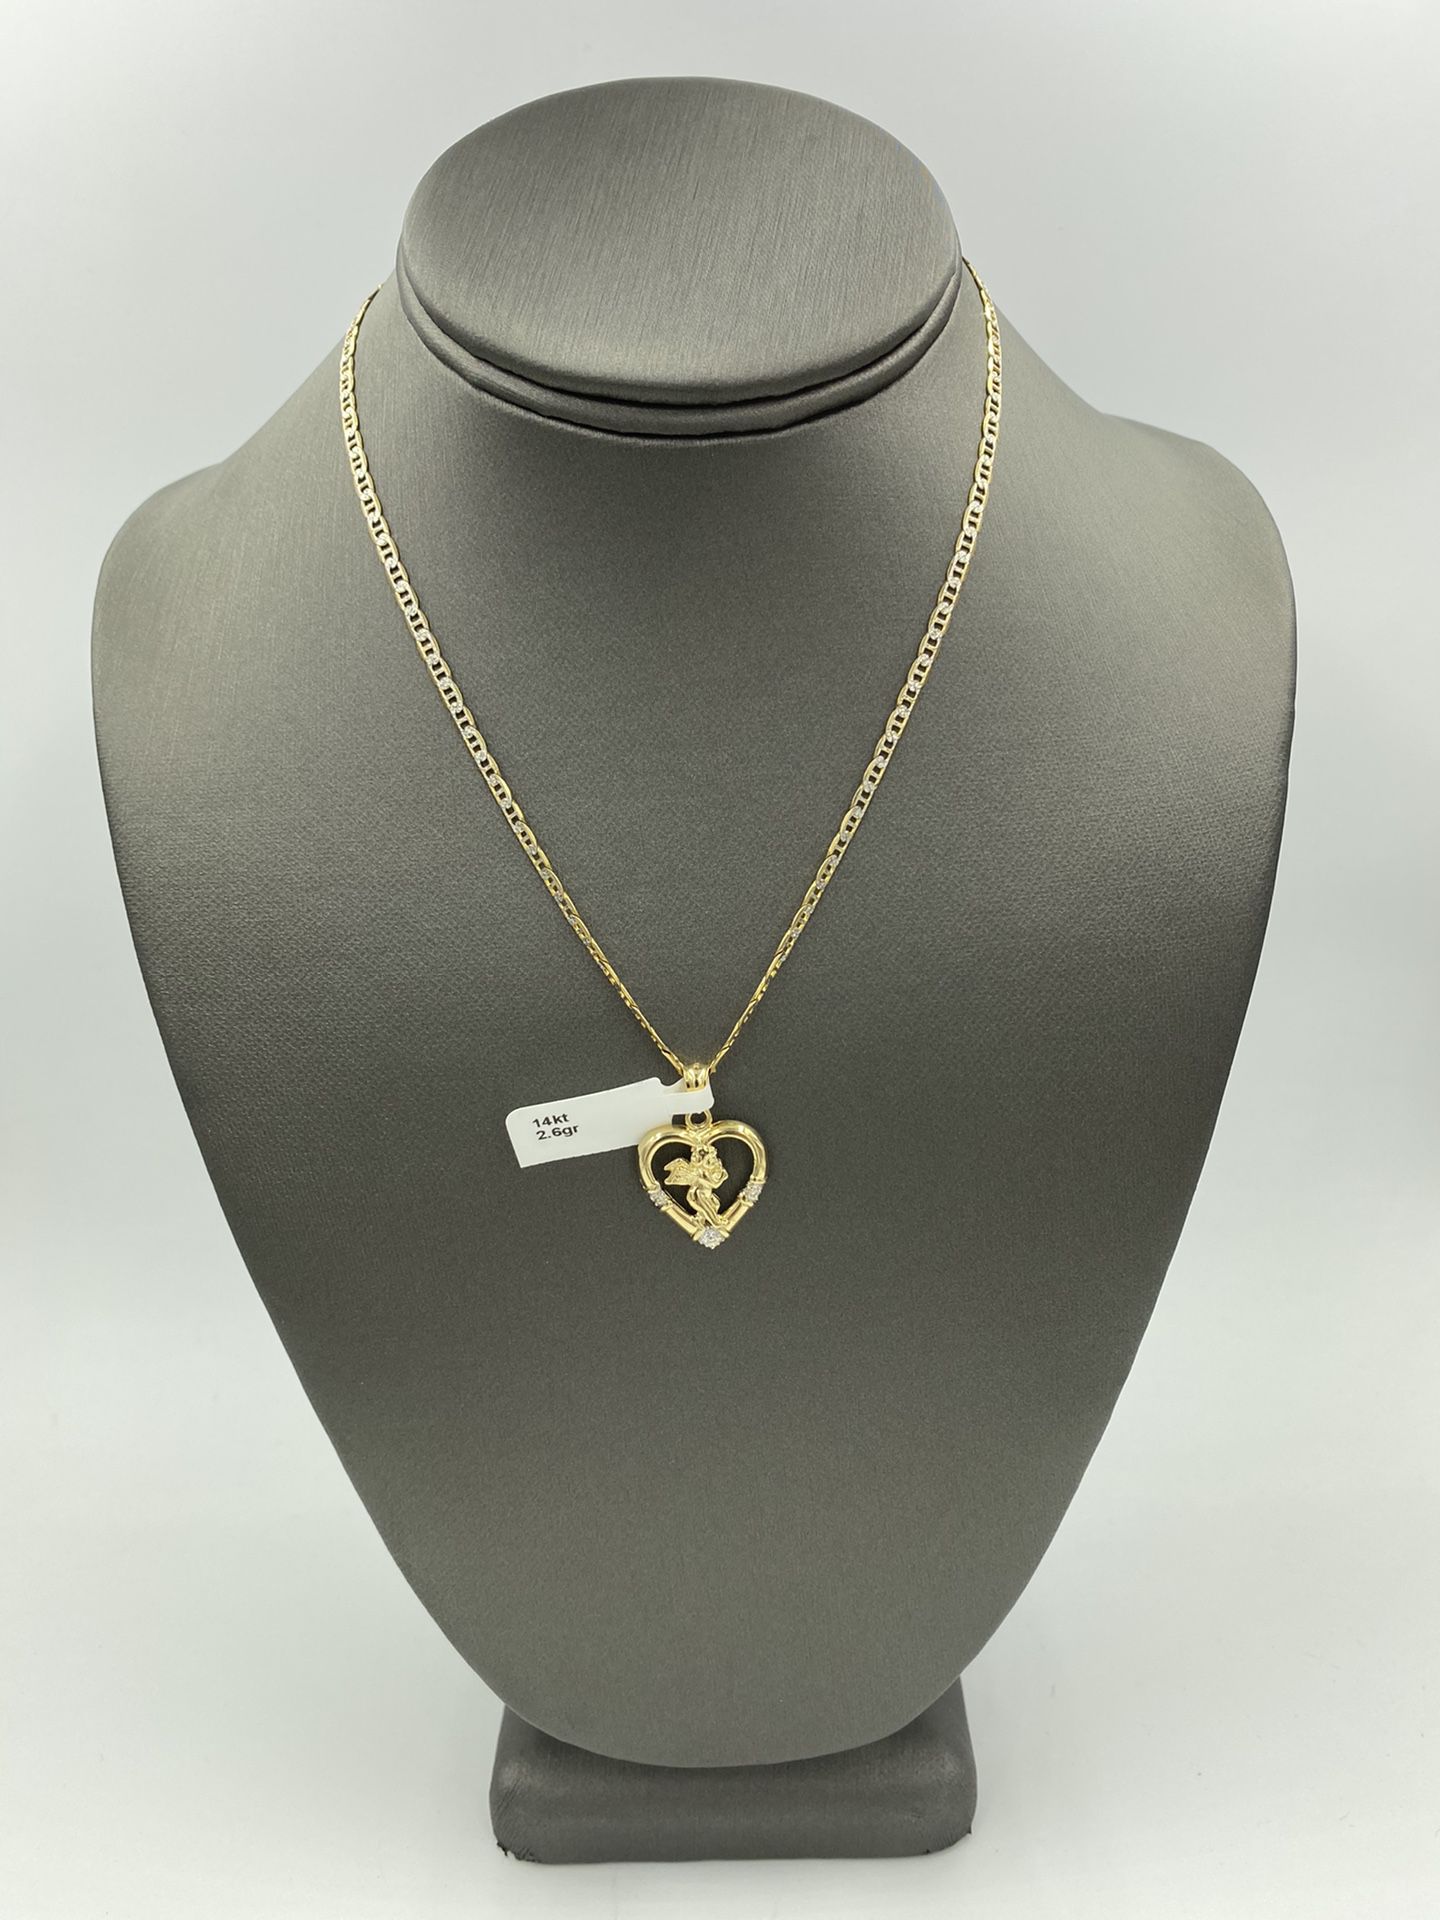 14KT YELLOW GOLD DIA-CUT GUCCI LINK CHAIN w/ 14KT YELLOW GOLD ANGEL CHARM